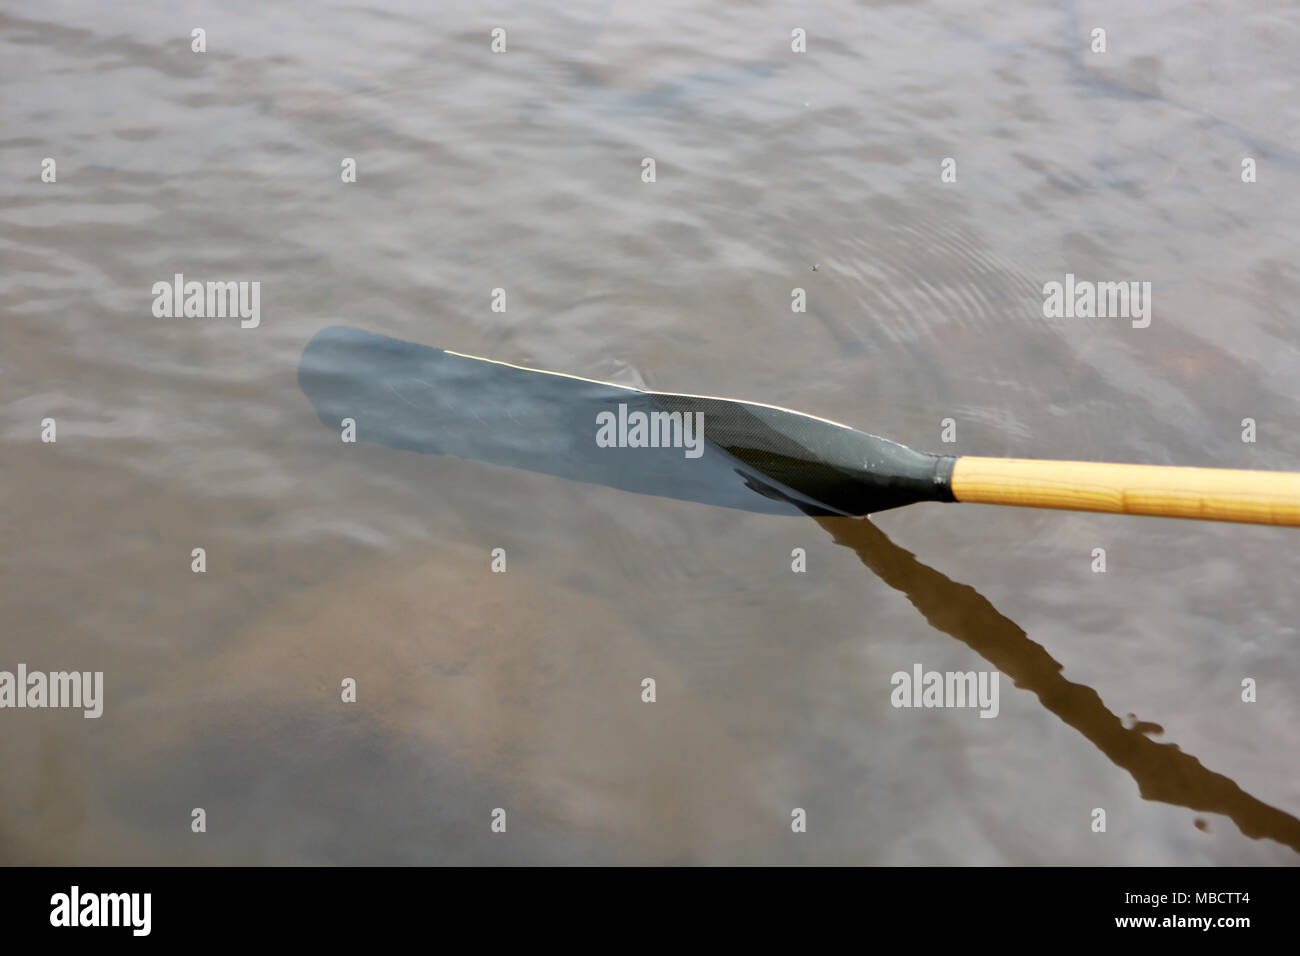 Aluminum oar blade dipping underwater when rowing on a freshwater lake or river in a close up view Stock Photo